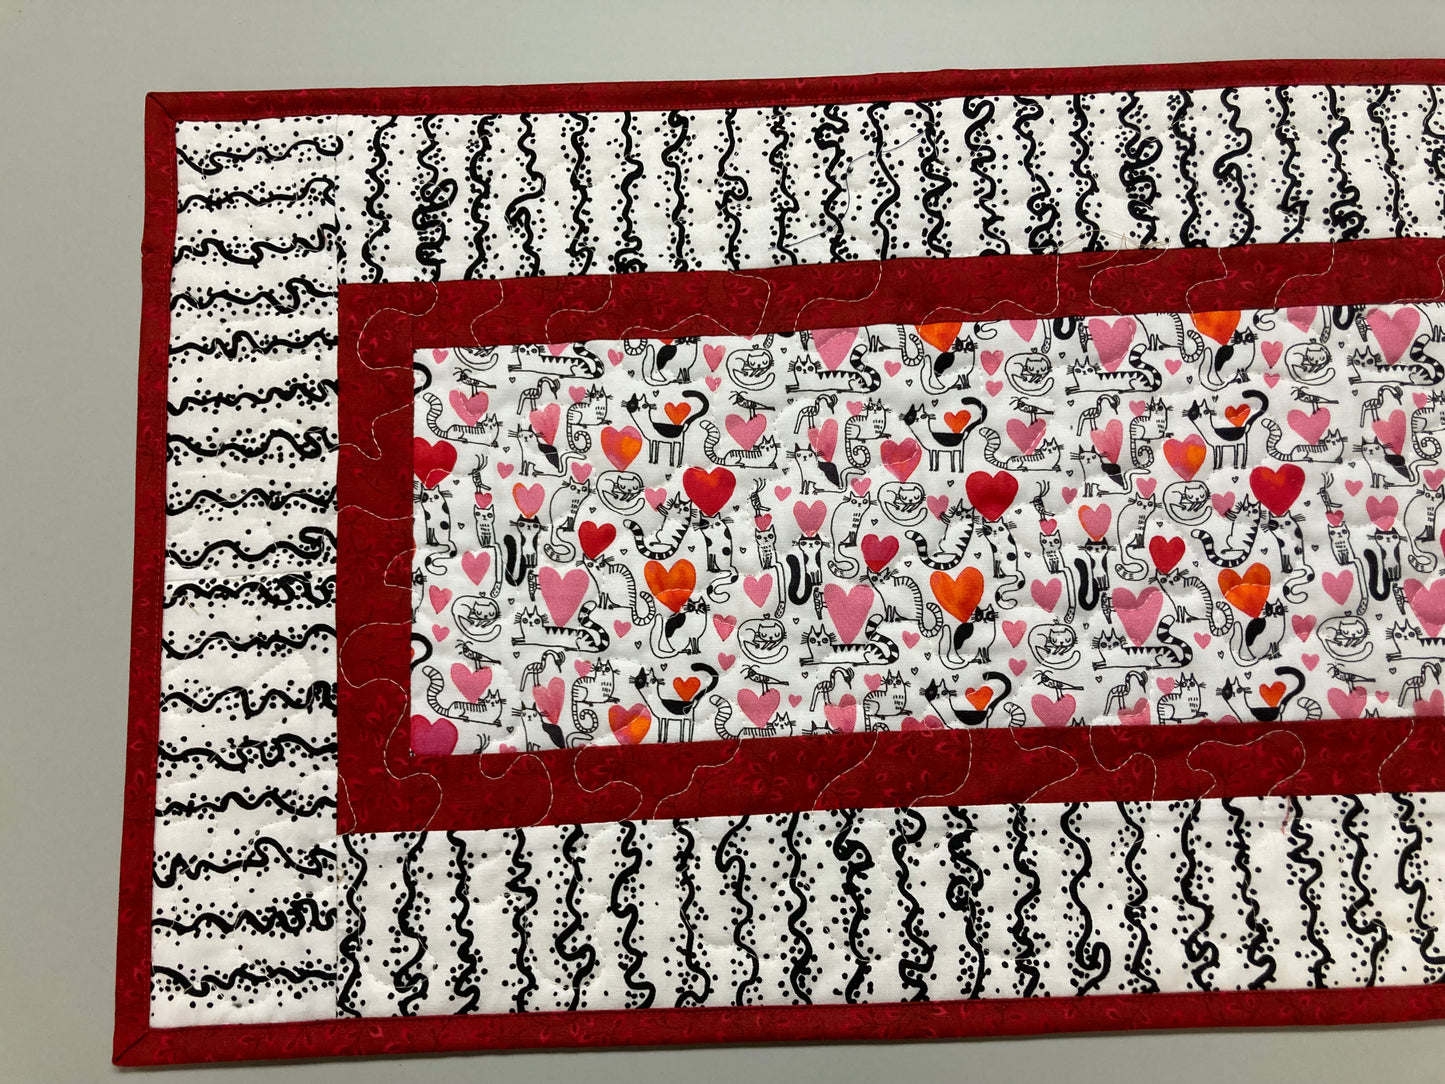 Sassy Cats Fabric Quilted Table Runner, Valentine Hearts 13x36” Cat Lover Feline Whimsical Quirky Fun, Dining Coffee End Table Handmade